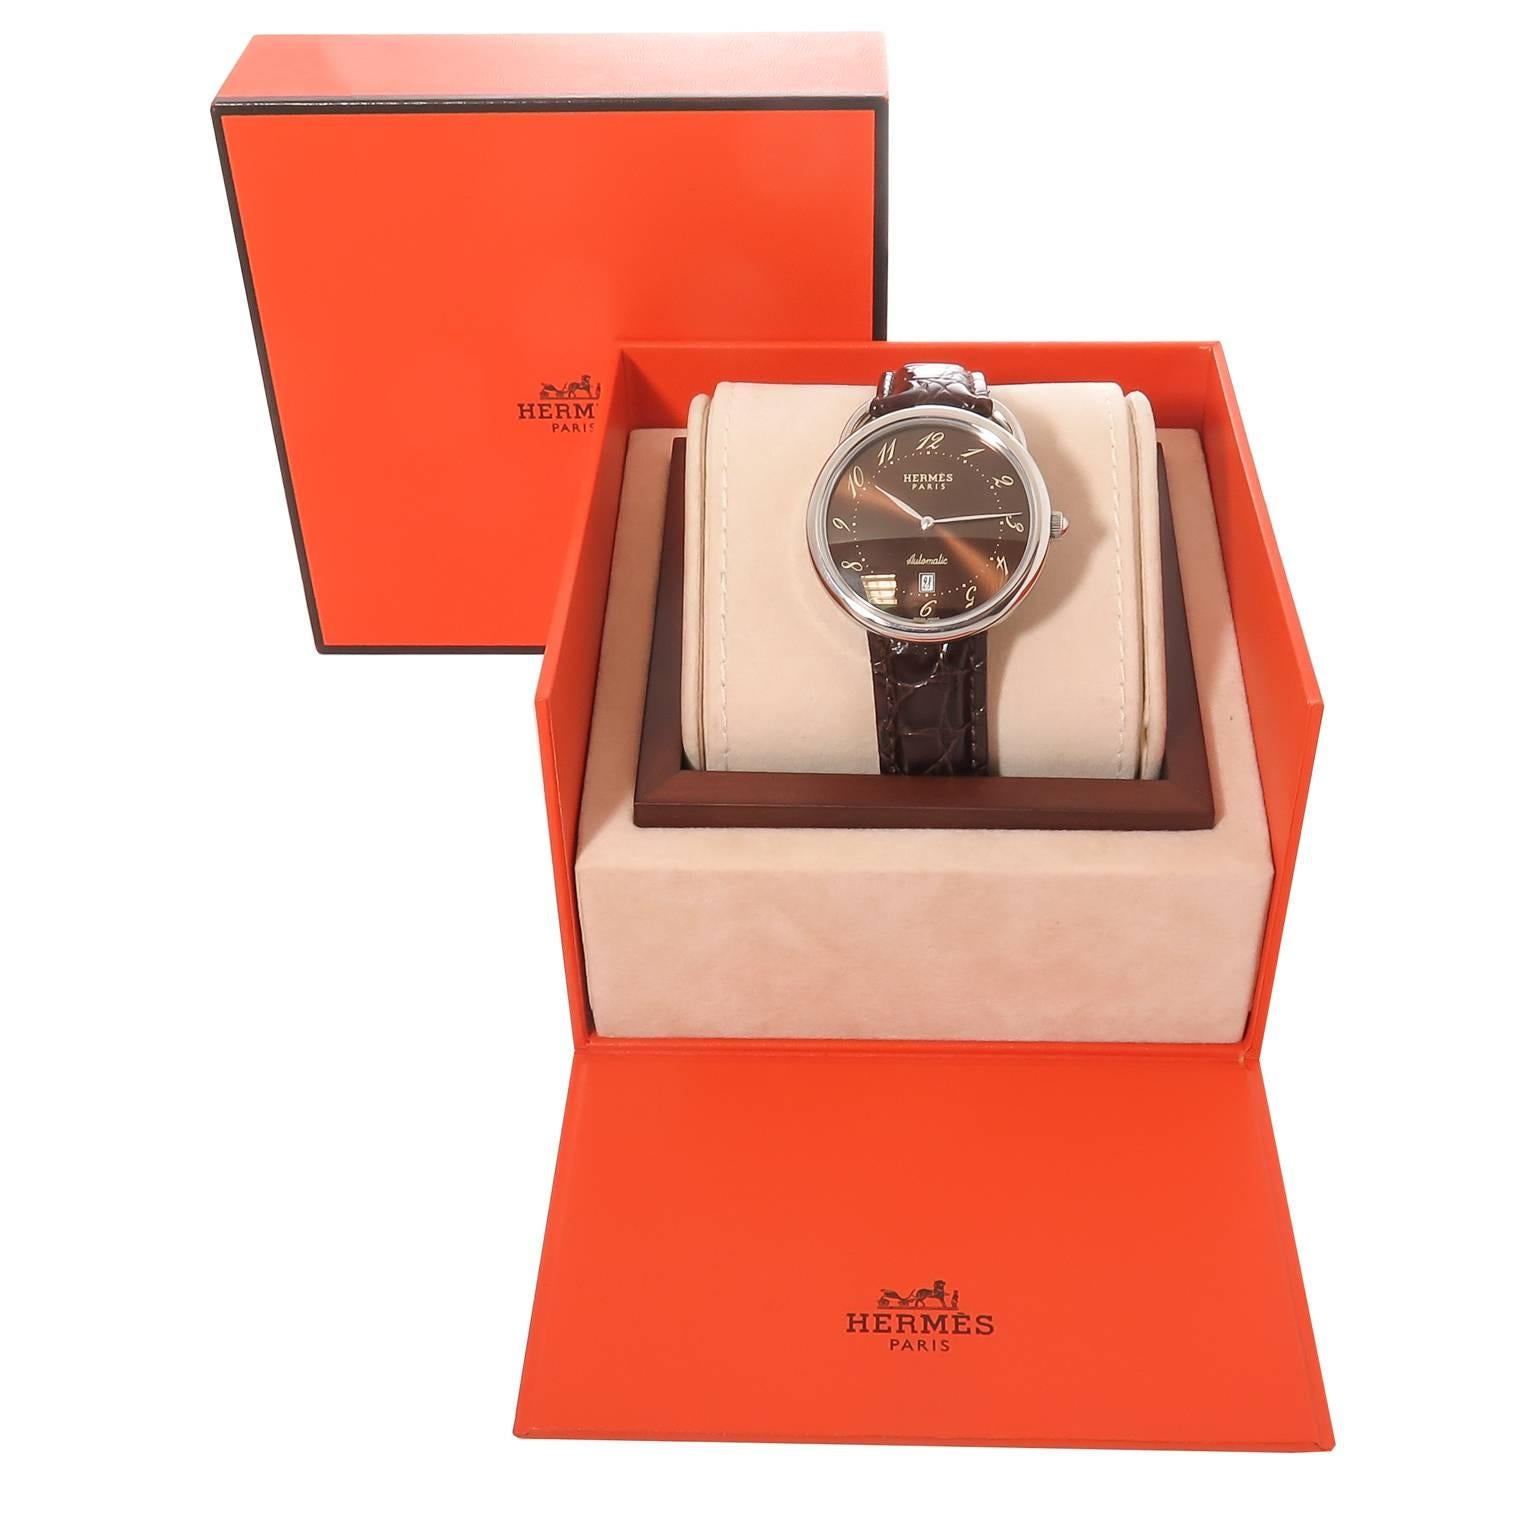 Circa 2012 Hermes Arceau collection Wrist watch, 41 MM Stainless Steel water Resistant case, Automatic self winding movement, Brown,mirrored Dial with White numerals and a calendar window at the 6 position. New Brown padded textured strap ( non